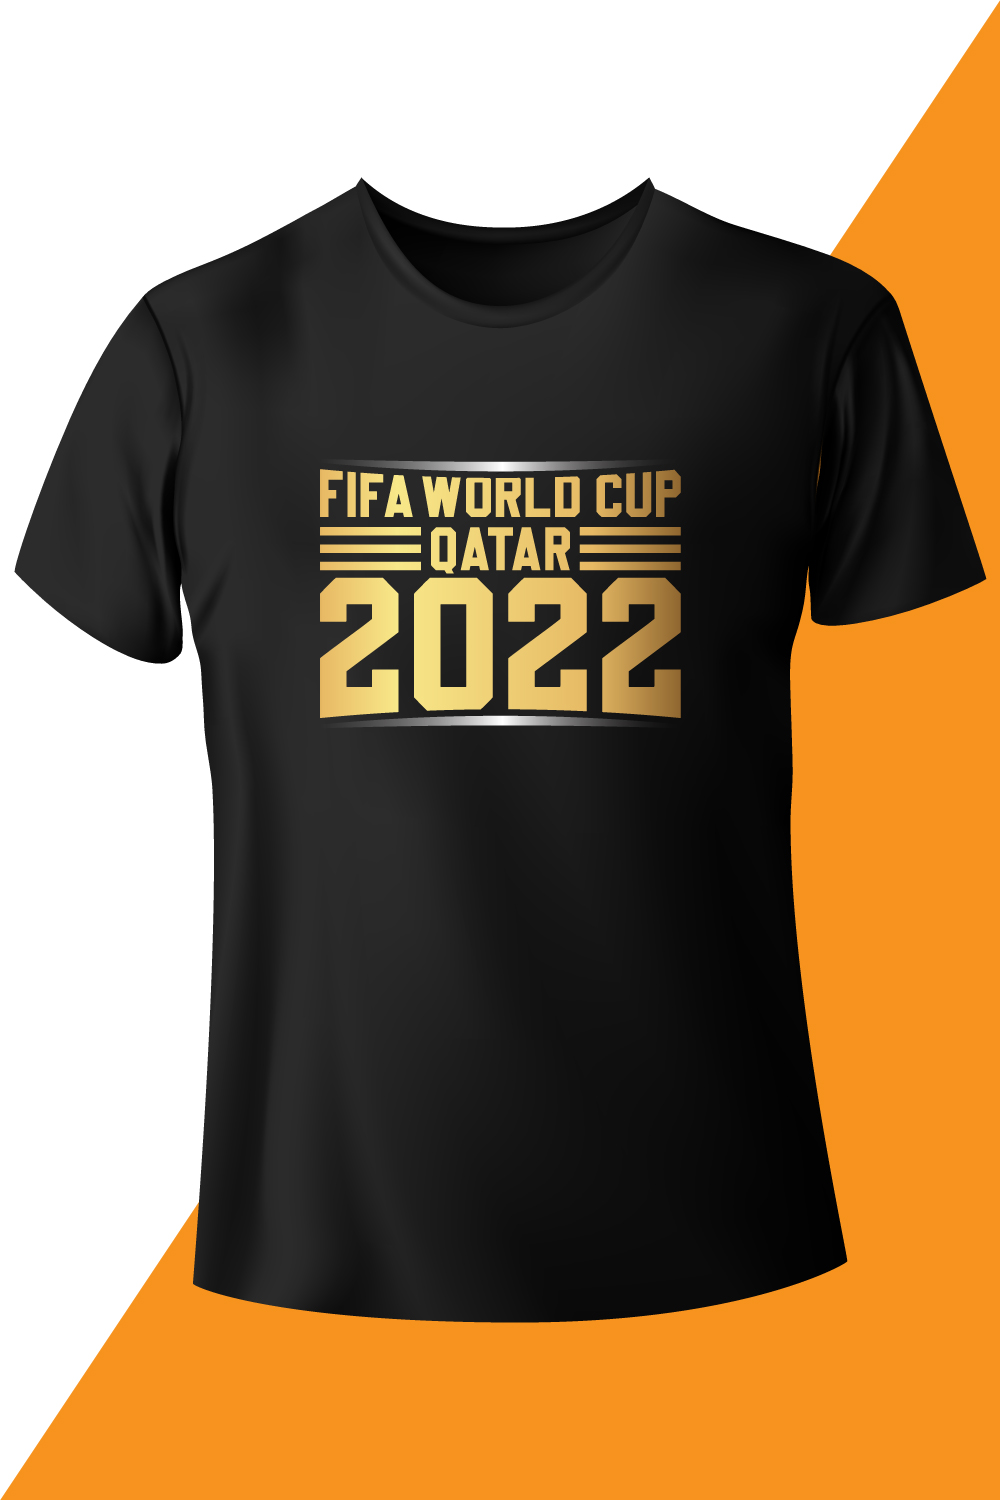 Image of a black t-shirt with a charming inscription fifa world cup qatar 2022.